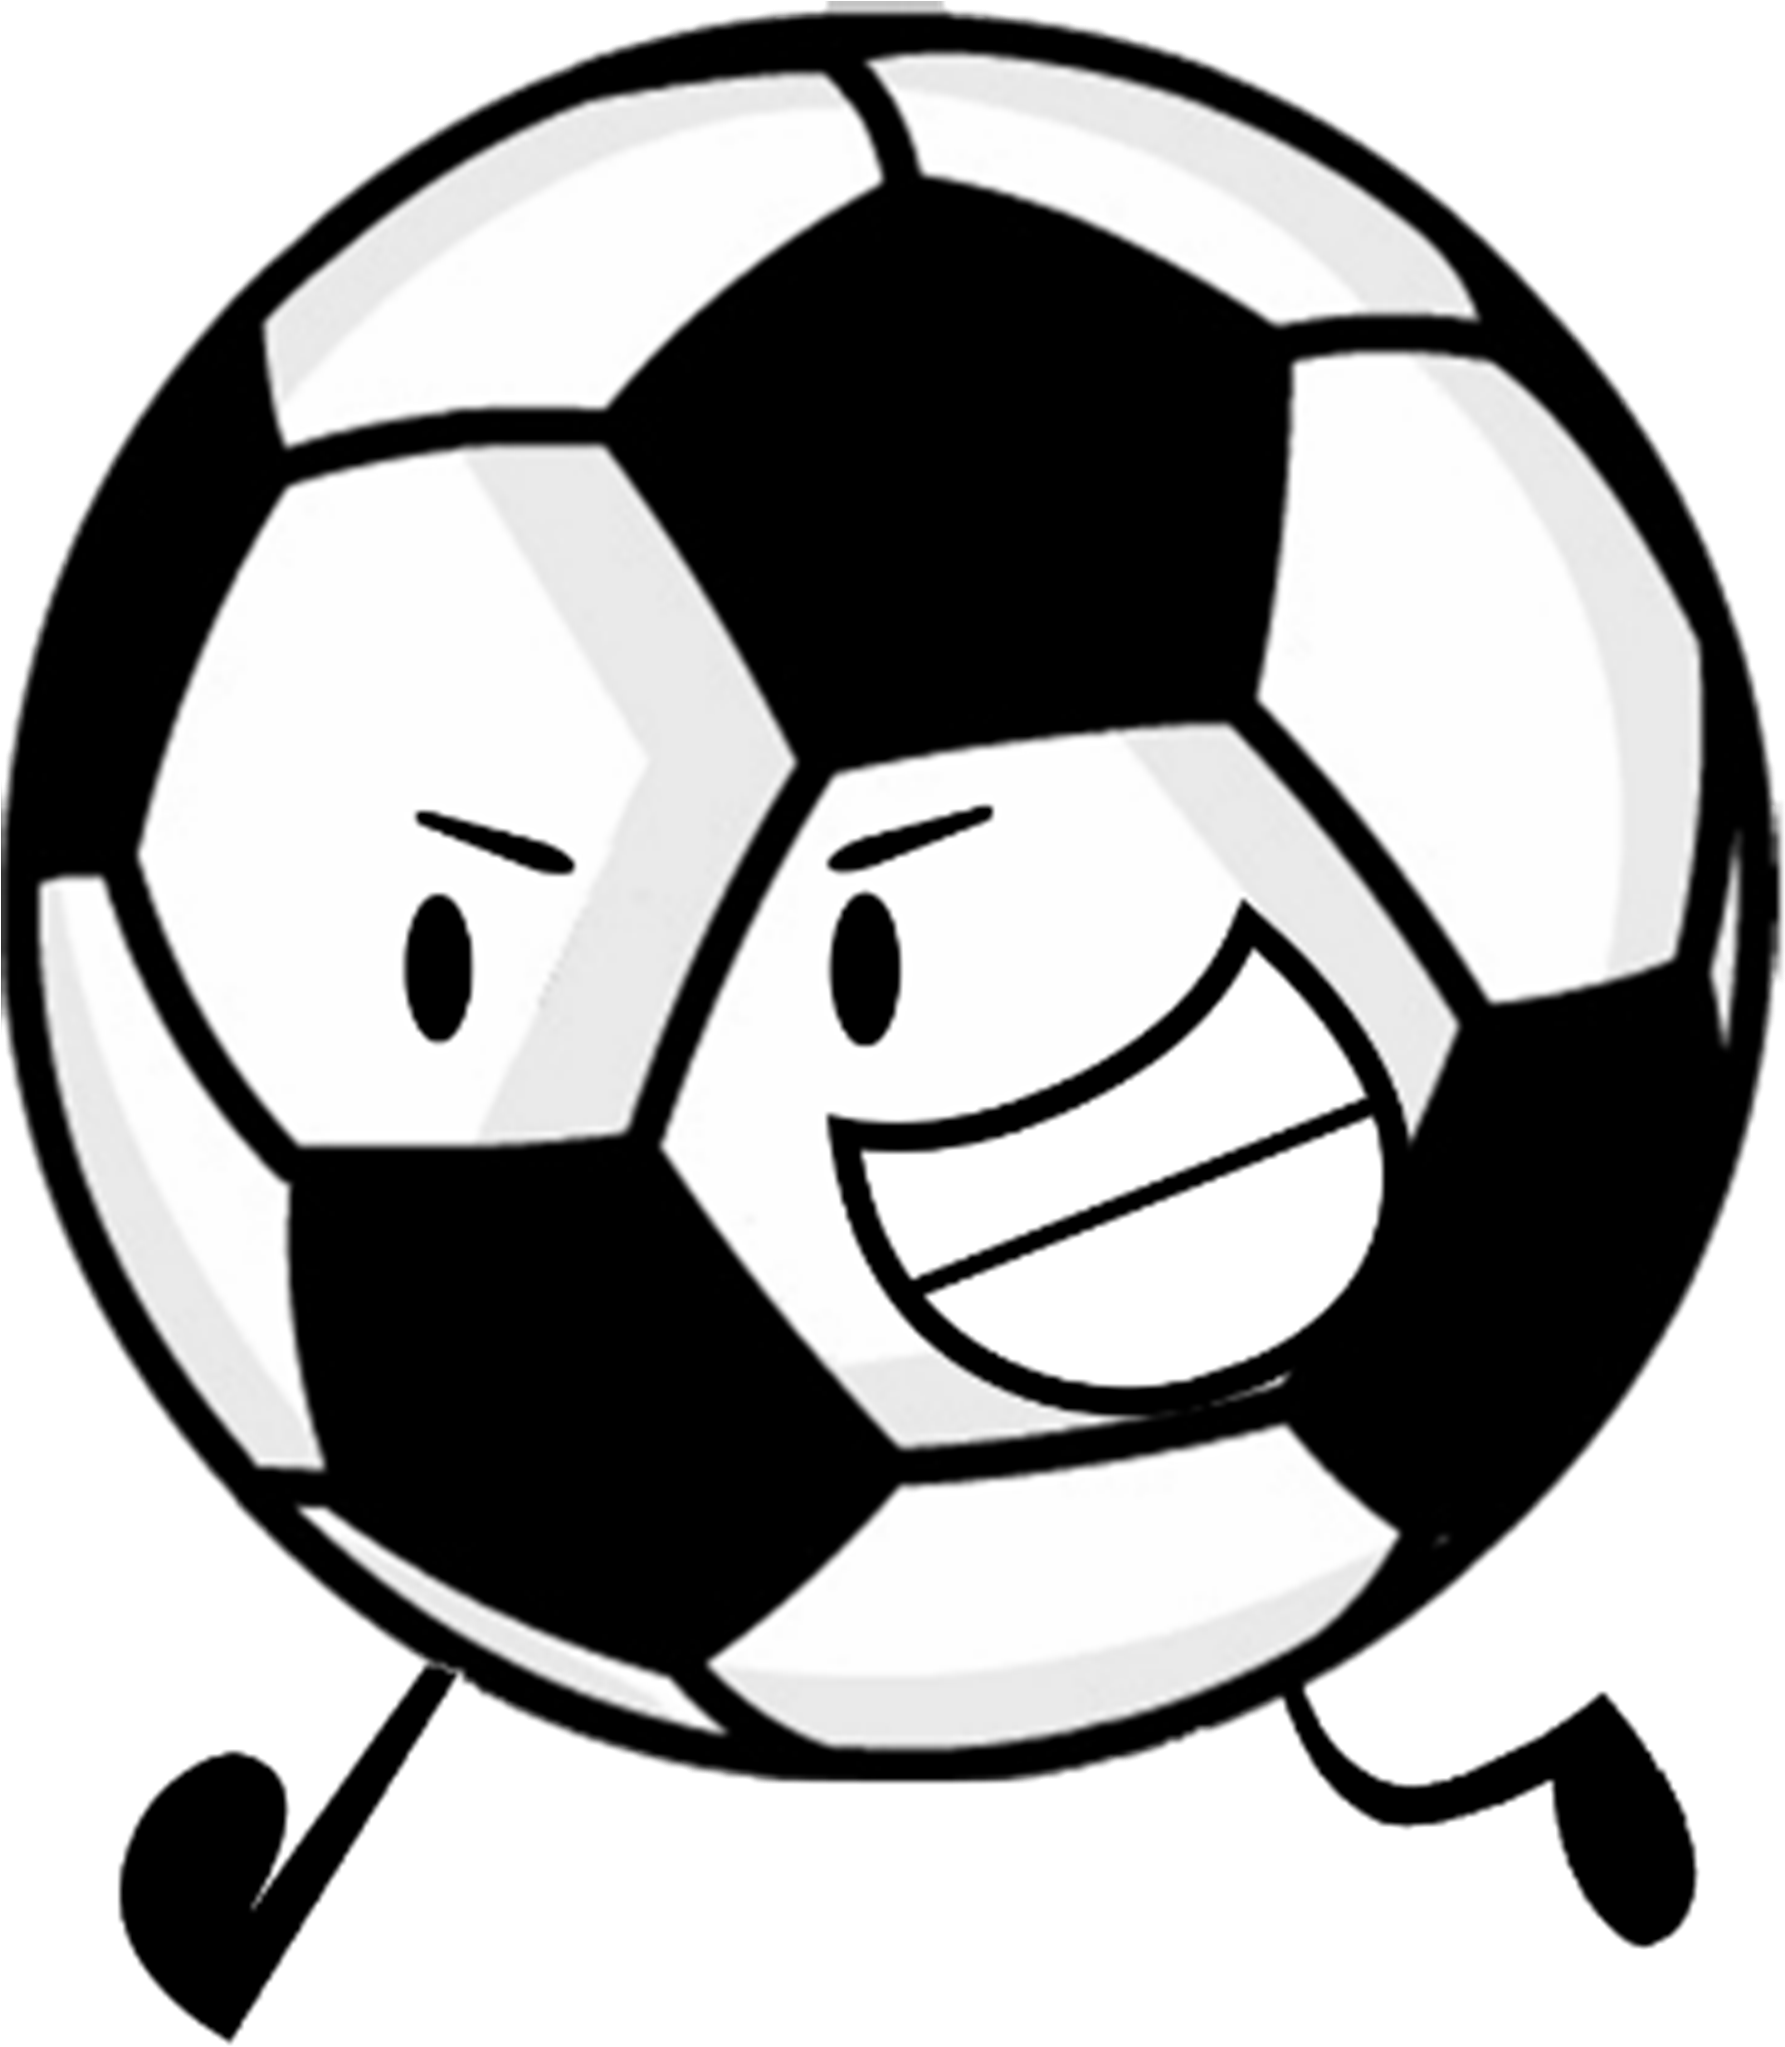 Soccer Ball-0 - Aff Suzuki Cup 2010 (1792x2092), Png Download